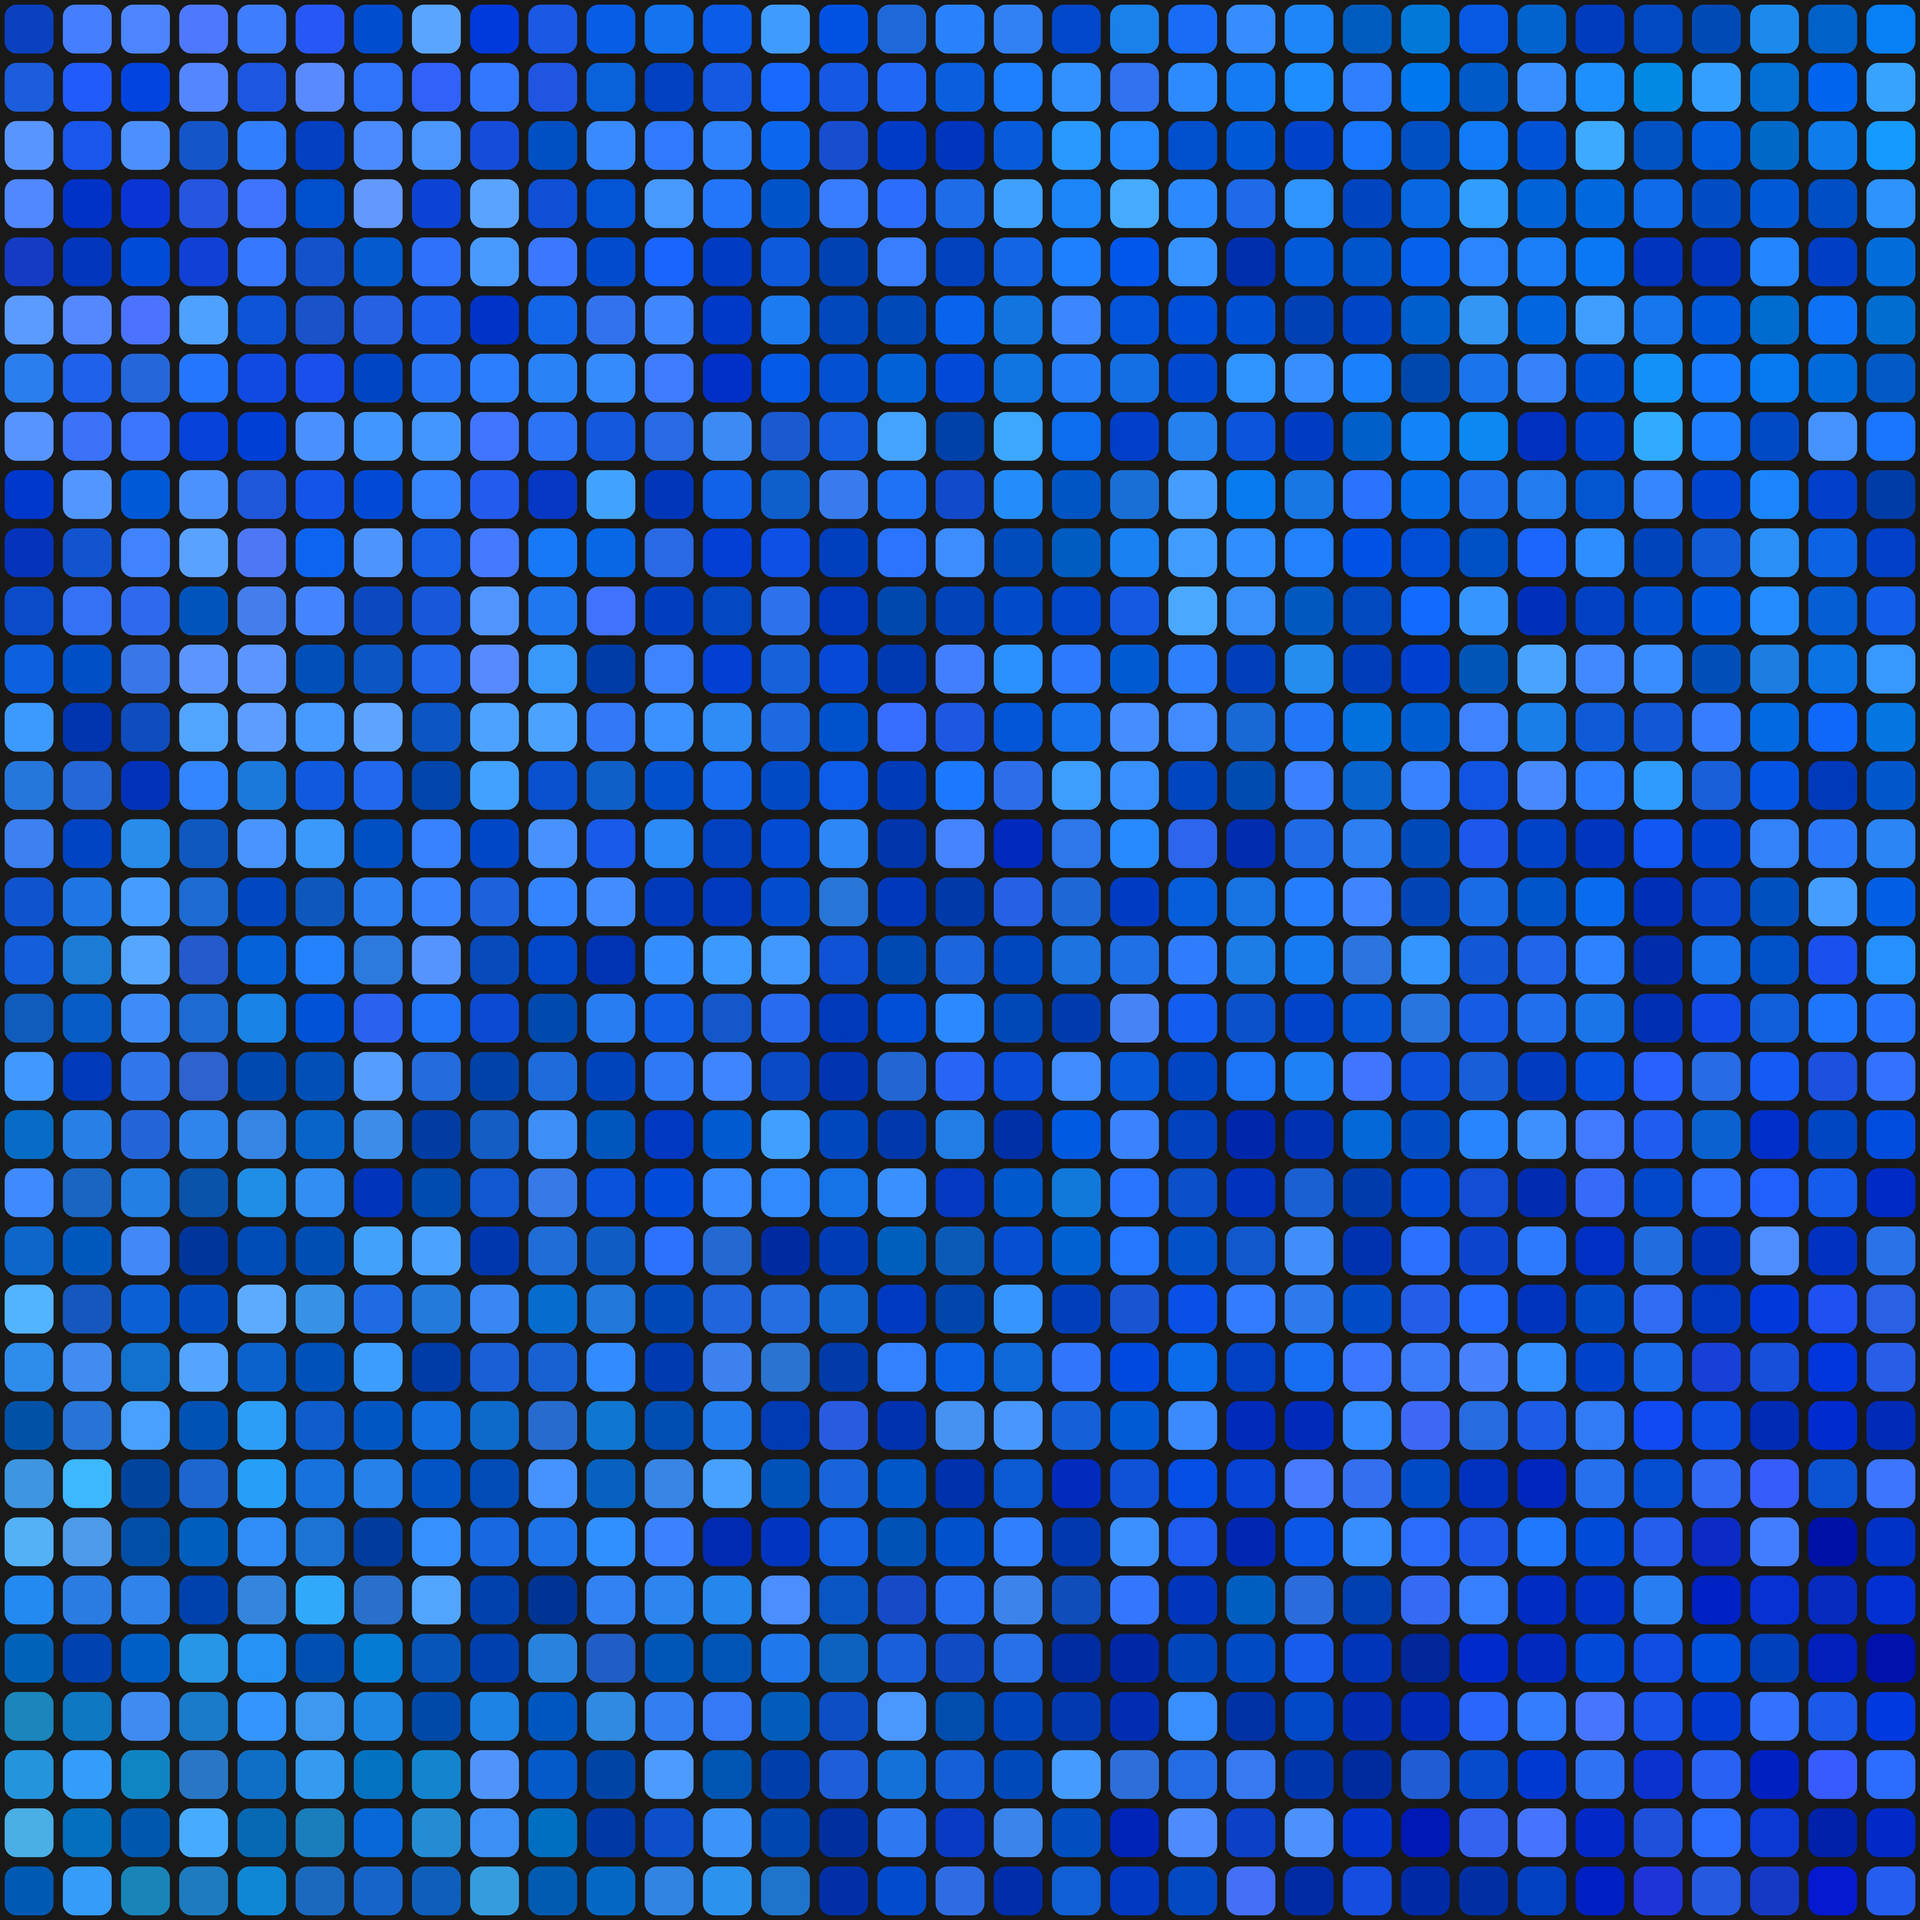 Pixel 5000X5000 Wallpaper and Background Image